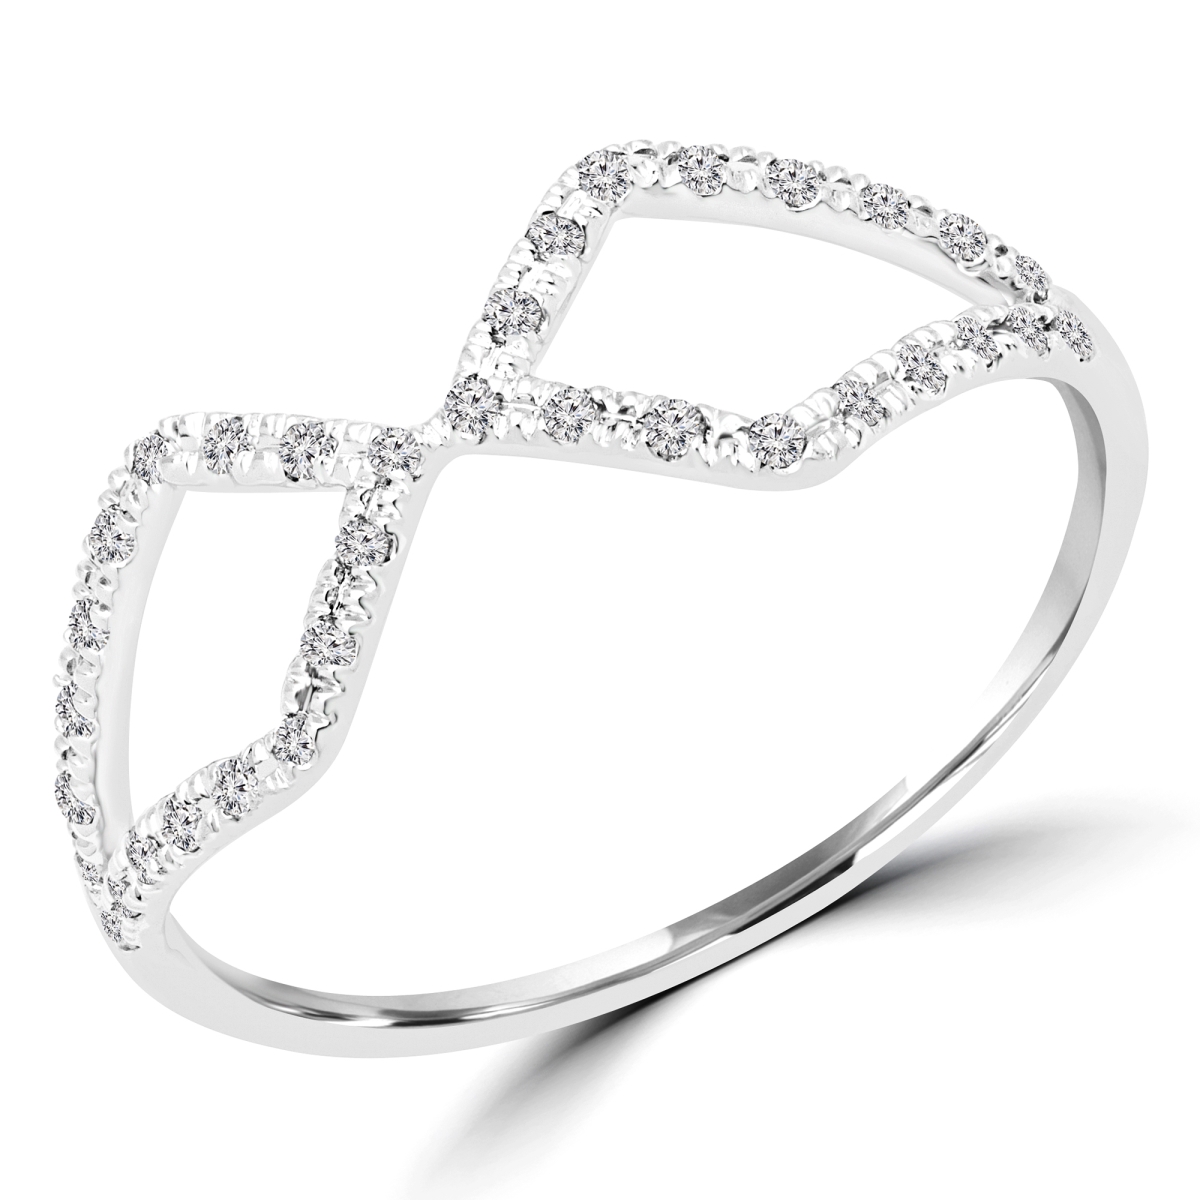 Picture of Majesty Diamonds MDR170055-3 0.12 CTW Round Diamond Cocktail Ring in 14K White Gold - 3